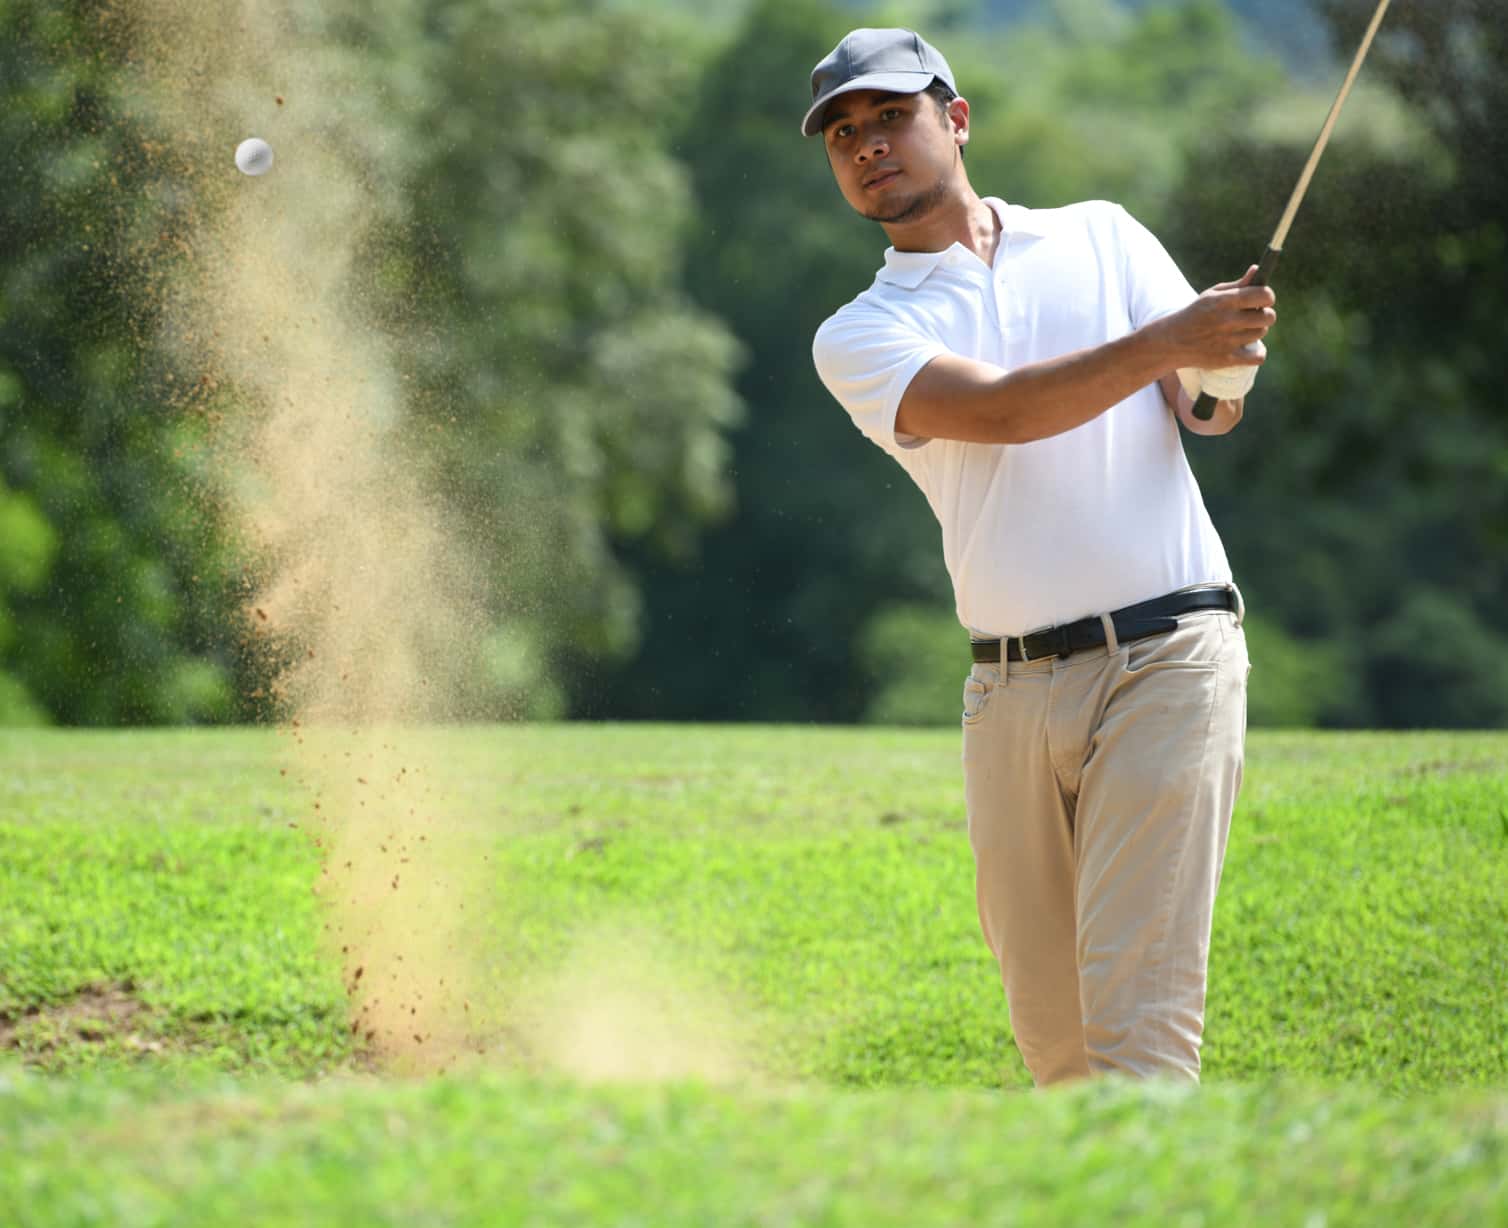 Golfer hitting out of a bunker